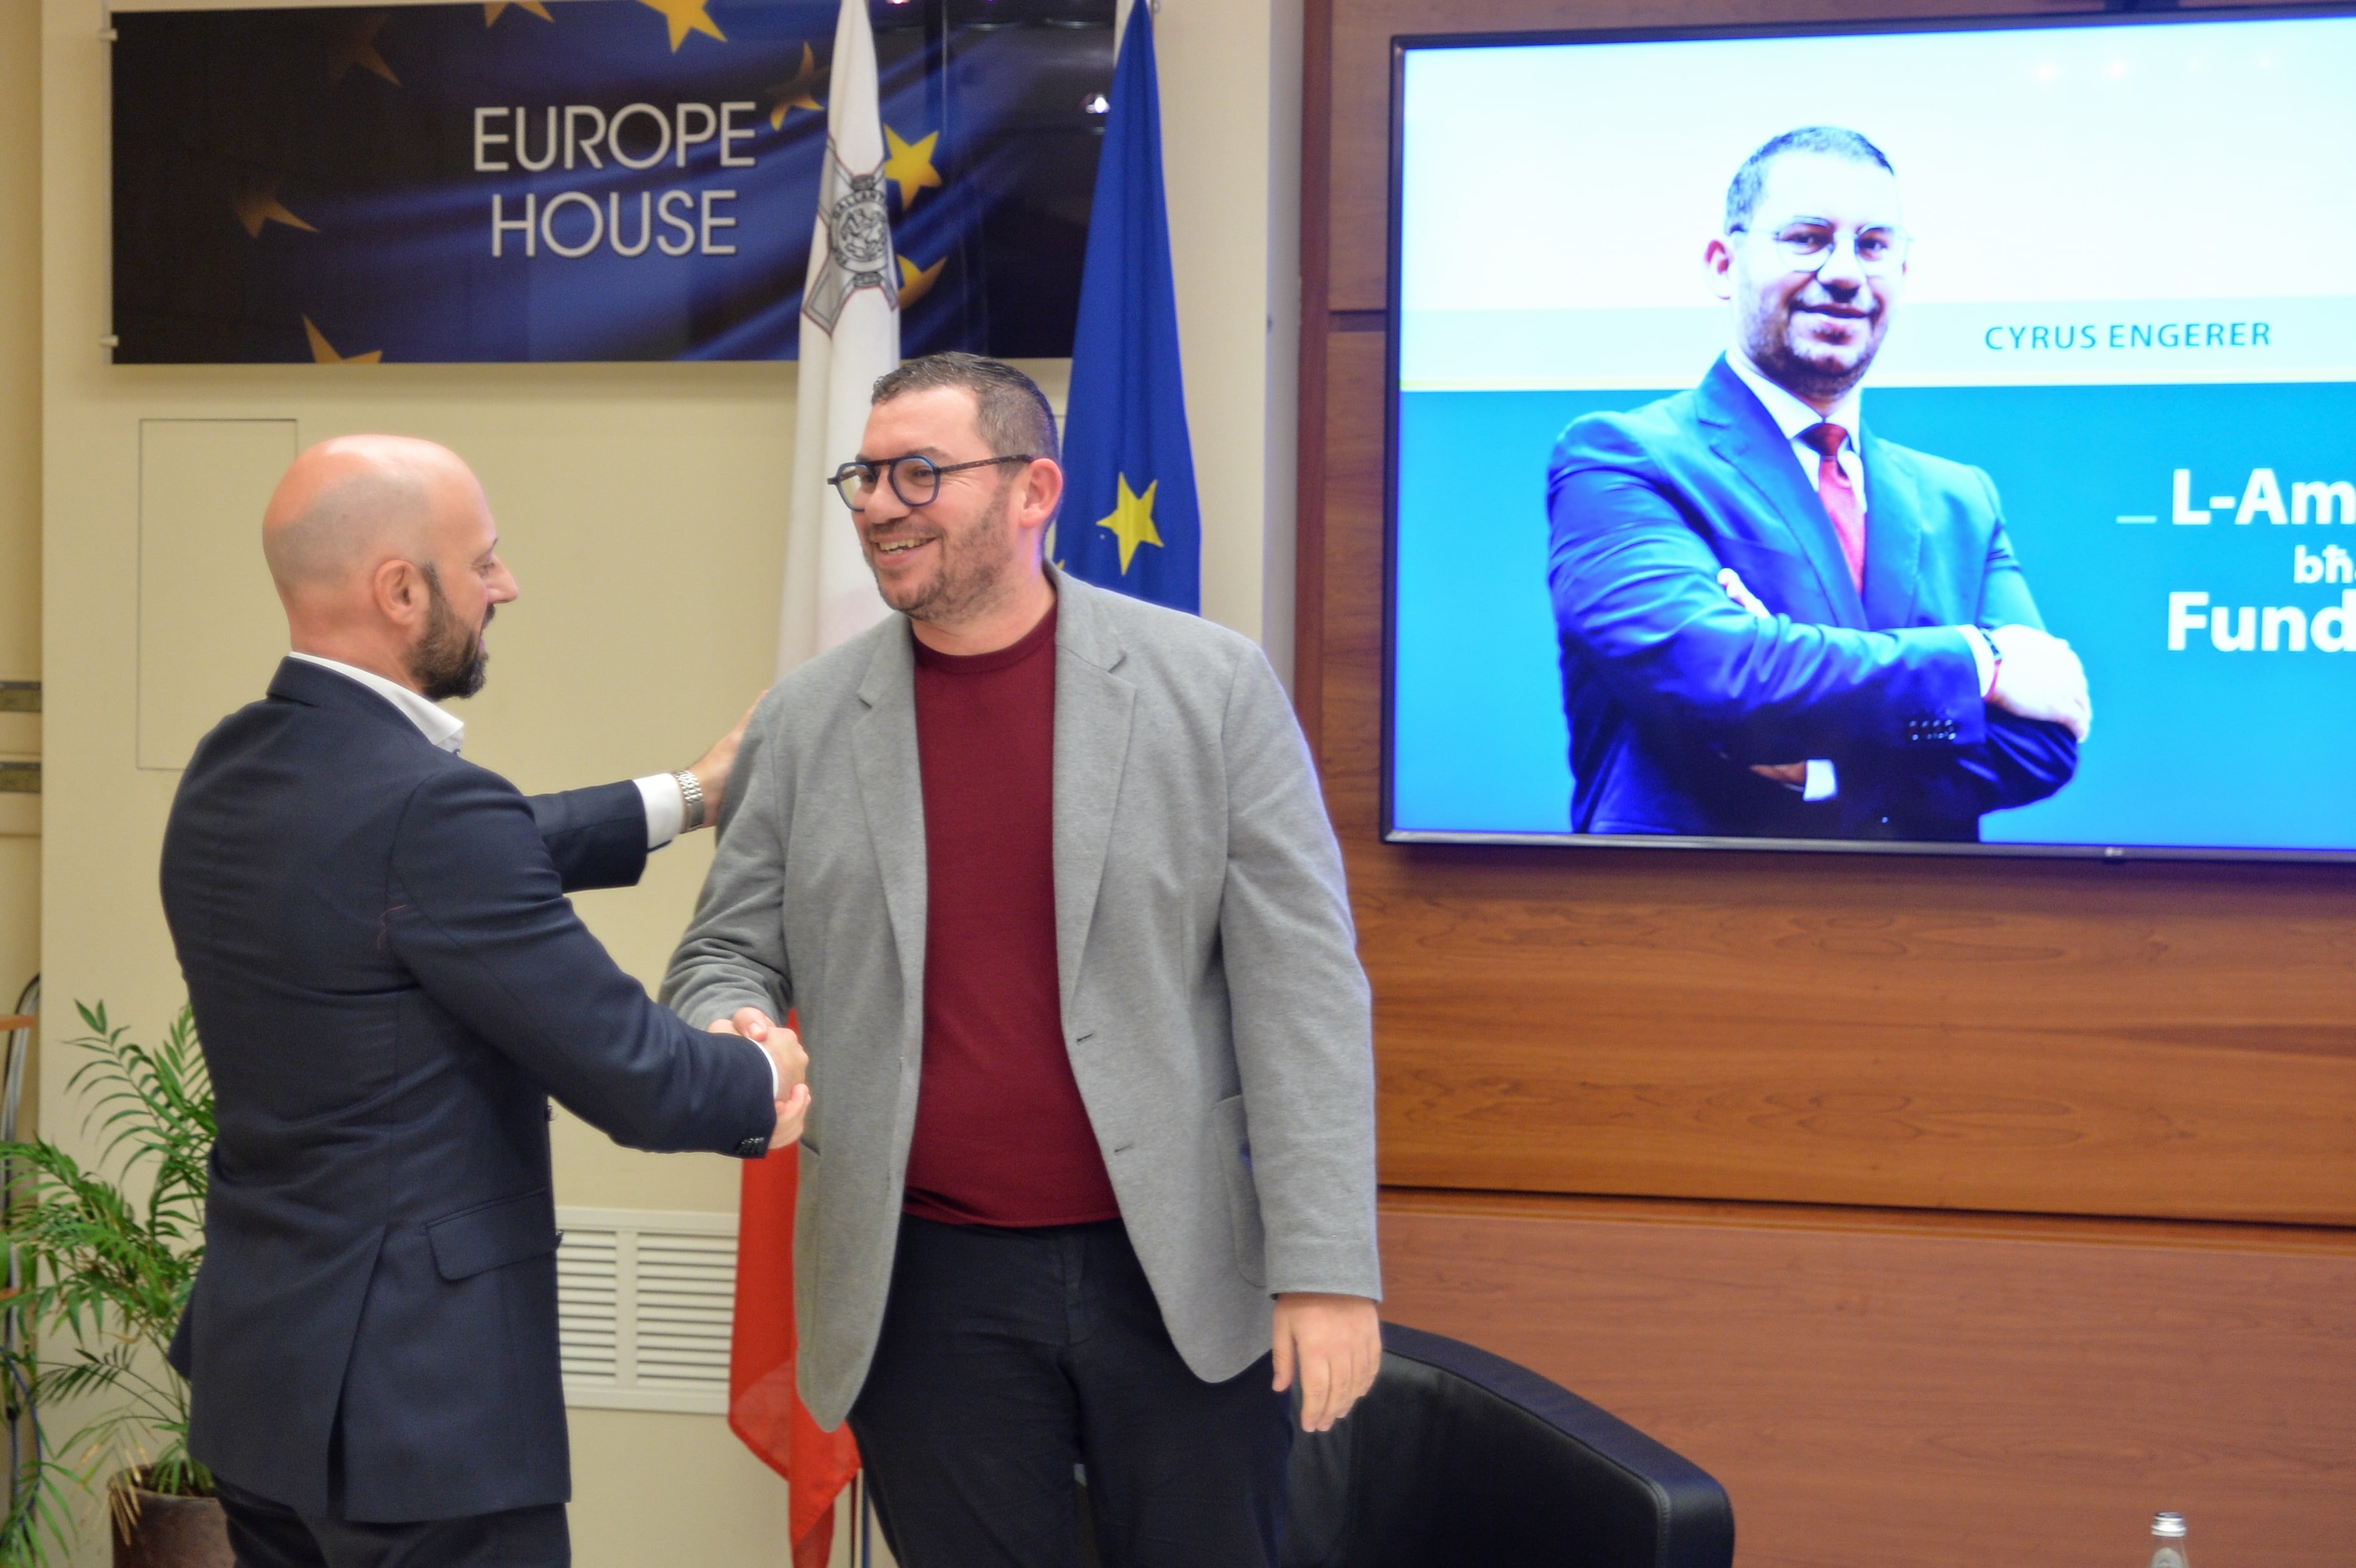 MEP Cyrus Engerer and Dr Mario Sammut shaking hands at "The Environment as a Fundamental Human Right" event